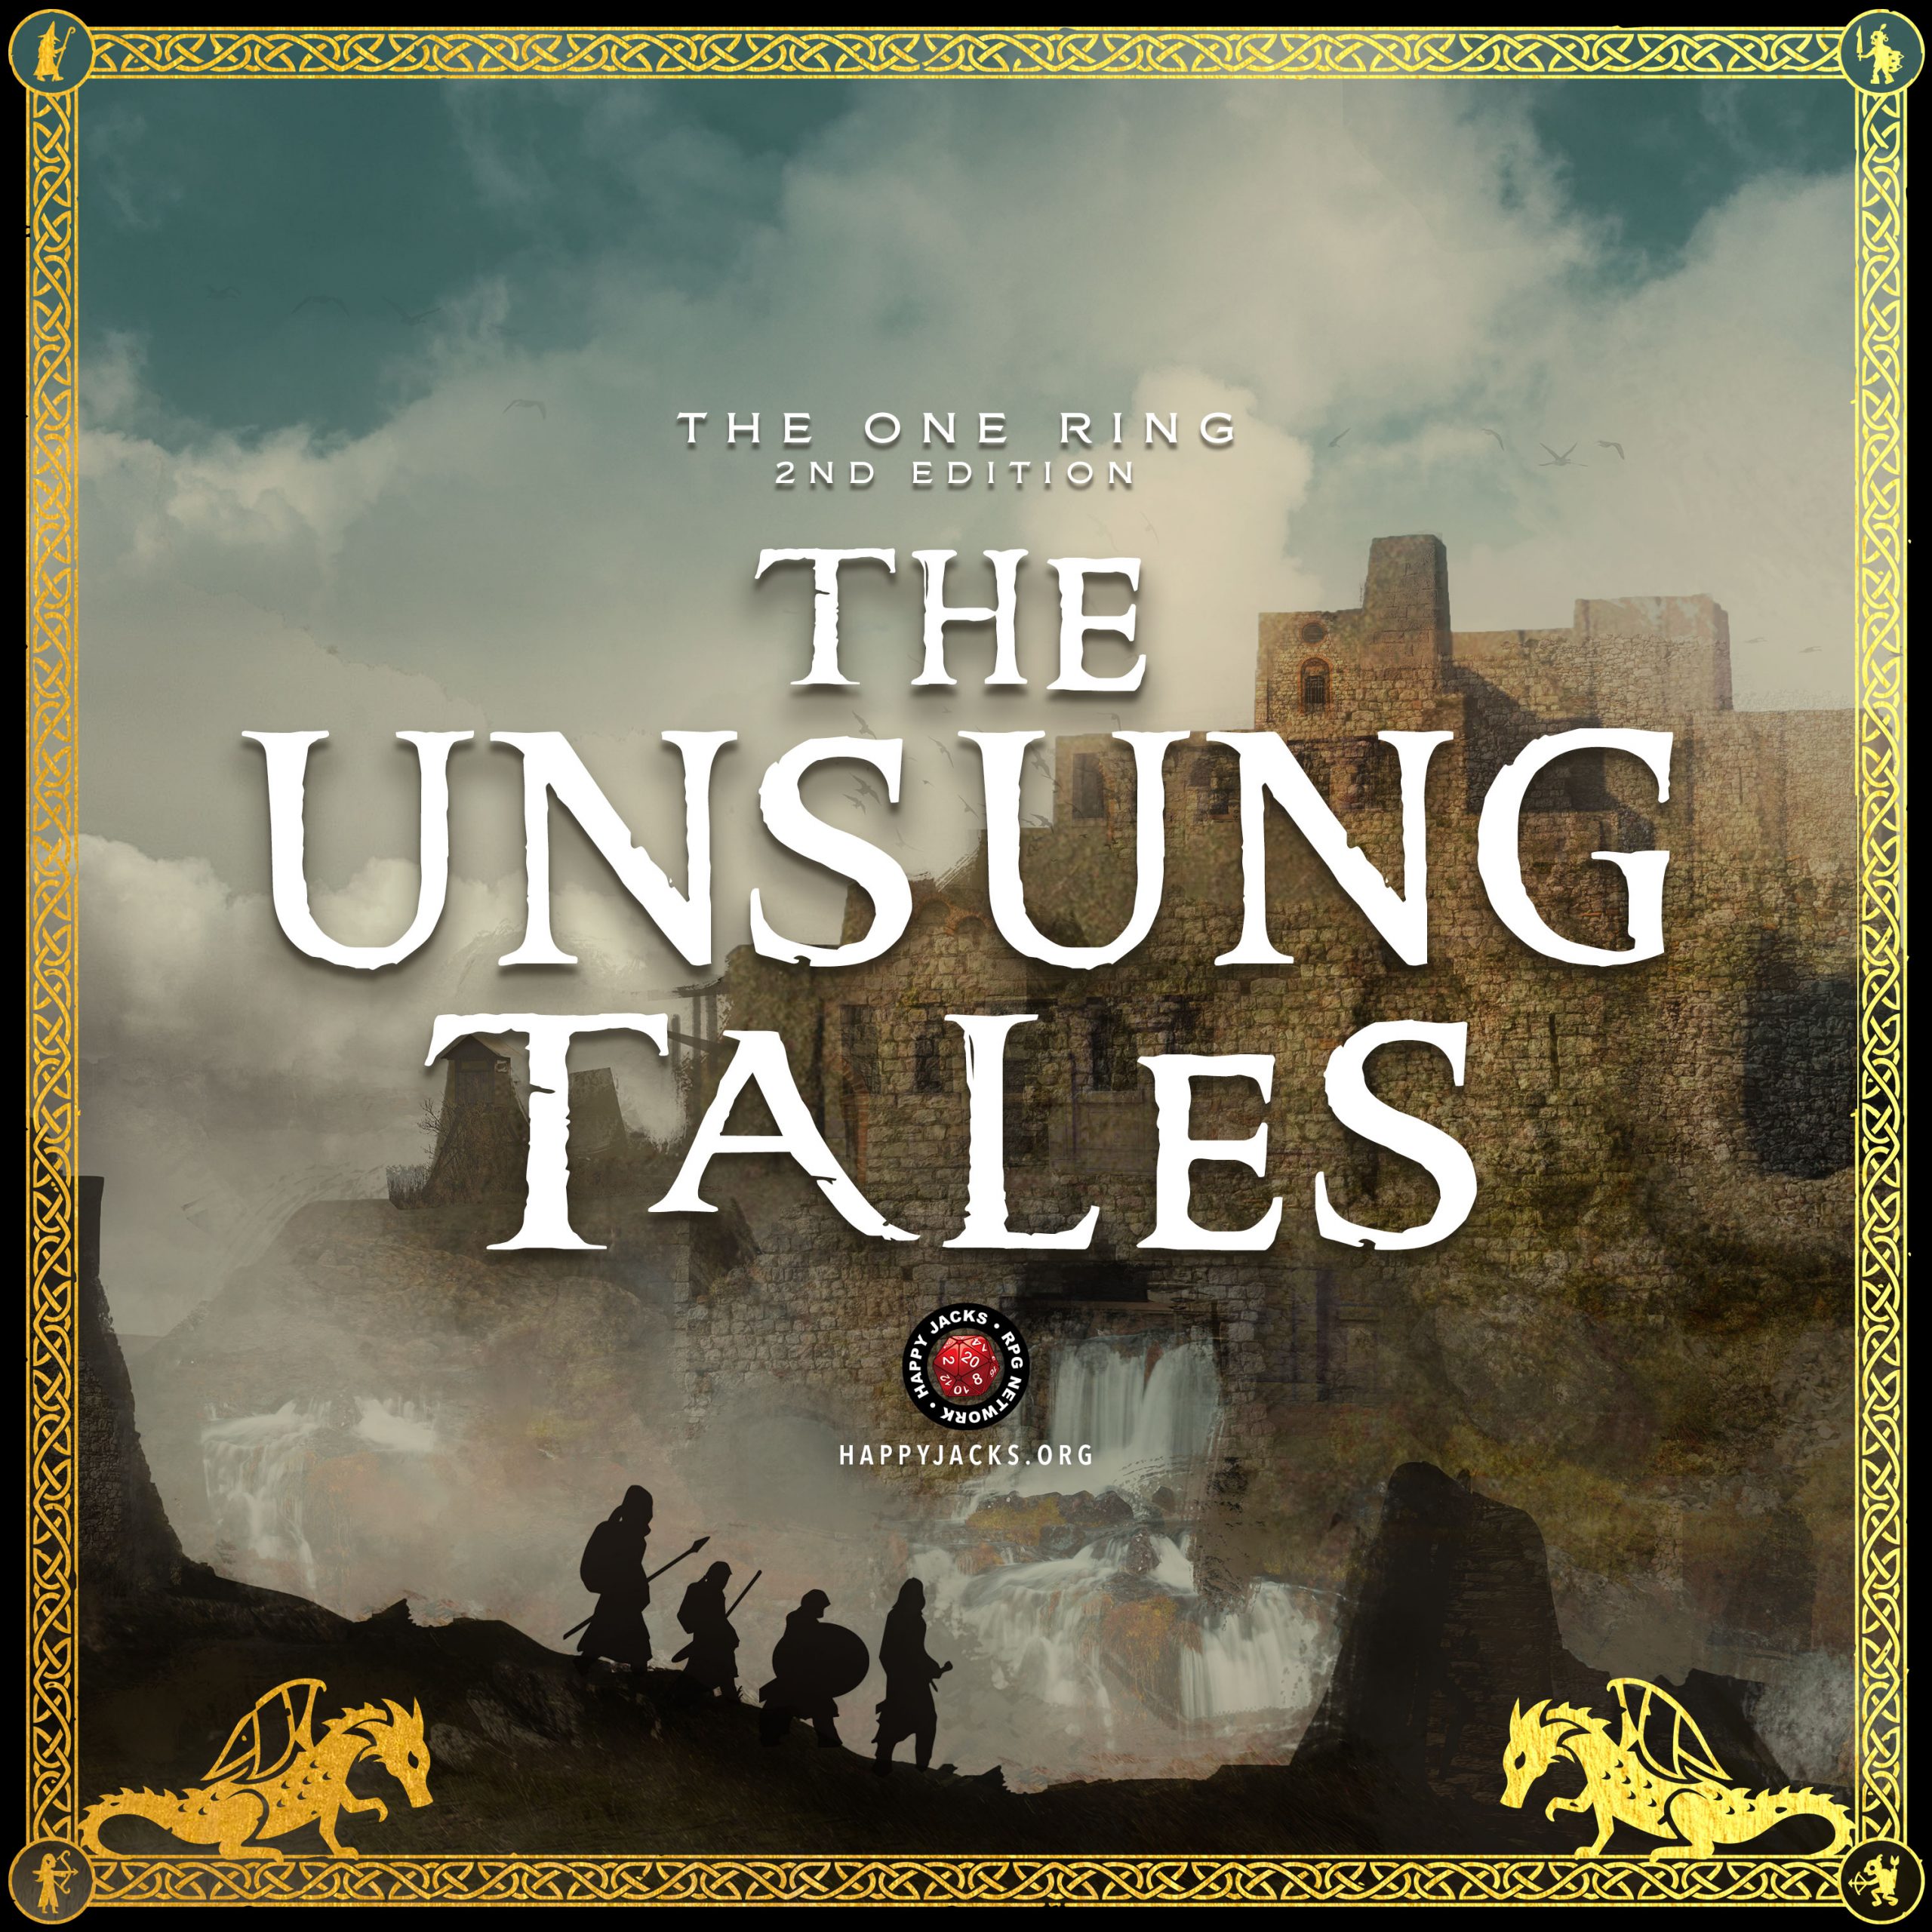 UNSUNG16 Lord Paddlefoot | The Unsung Tales | The One Ring 2e